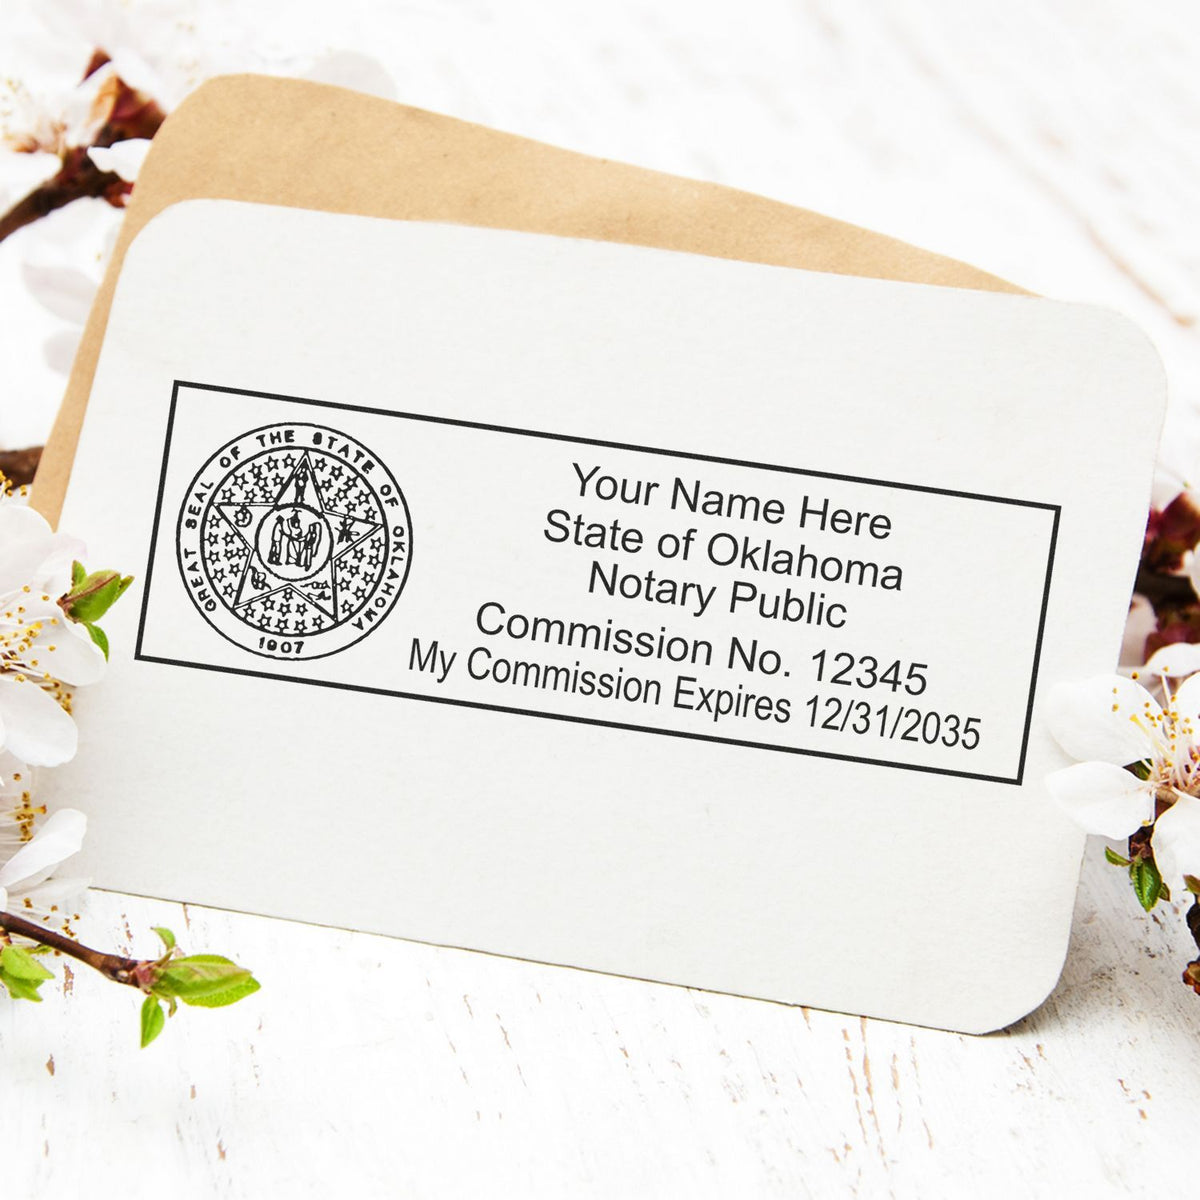 This paper is stamped with a sample imprint of the Super Slim Oklahoma Notary Public Stamp, signifying its quality and reliability.